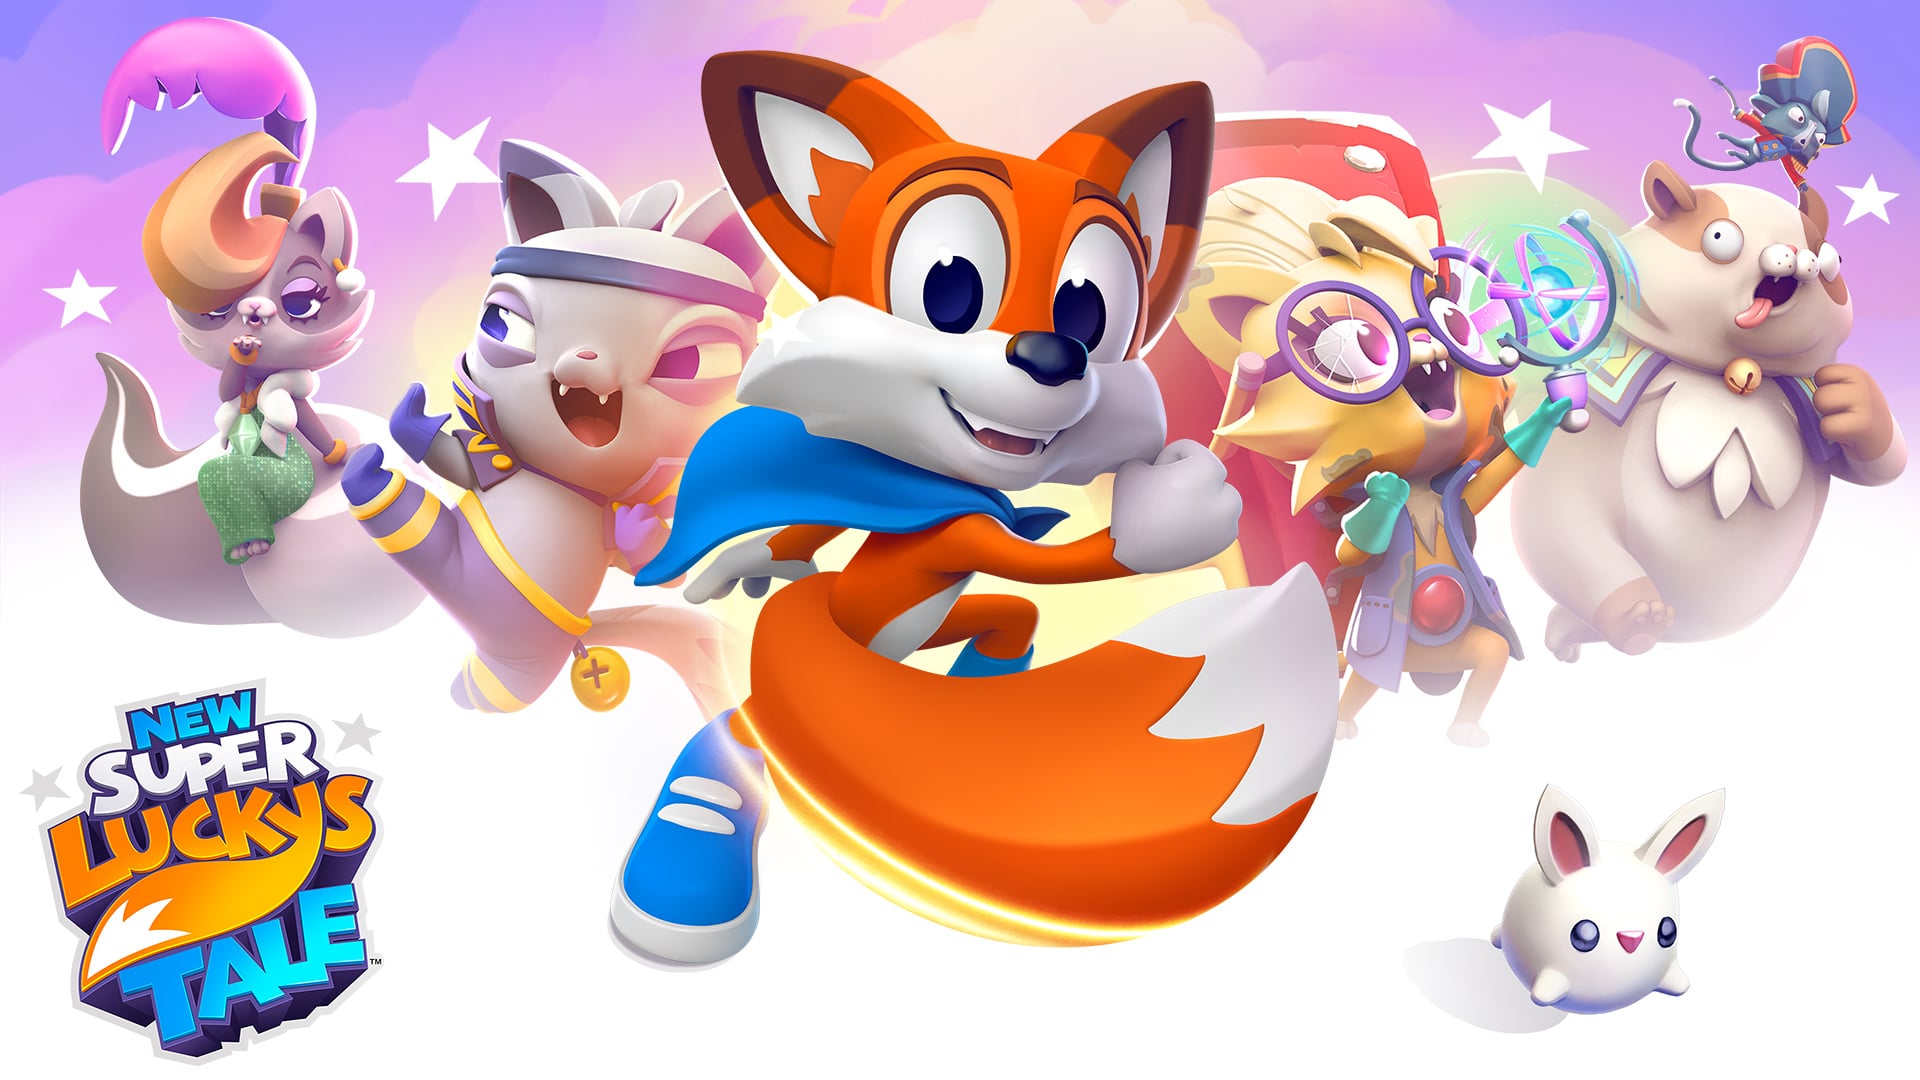 New Super Lucky’s Tale llega pronto a Xbox One y PS4